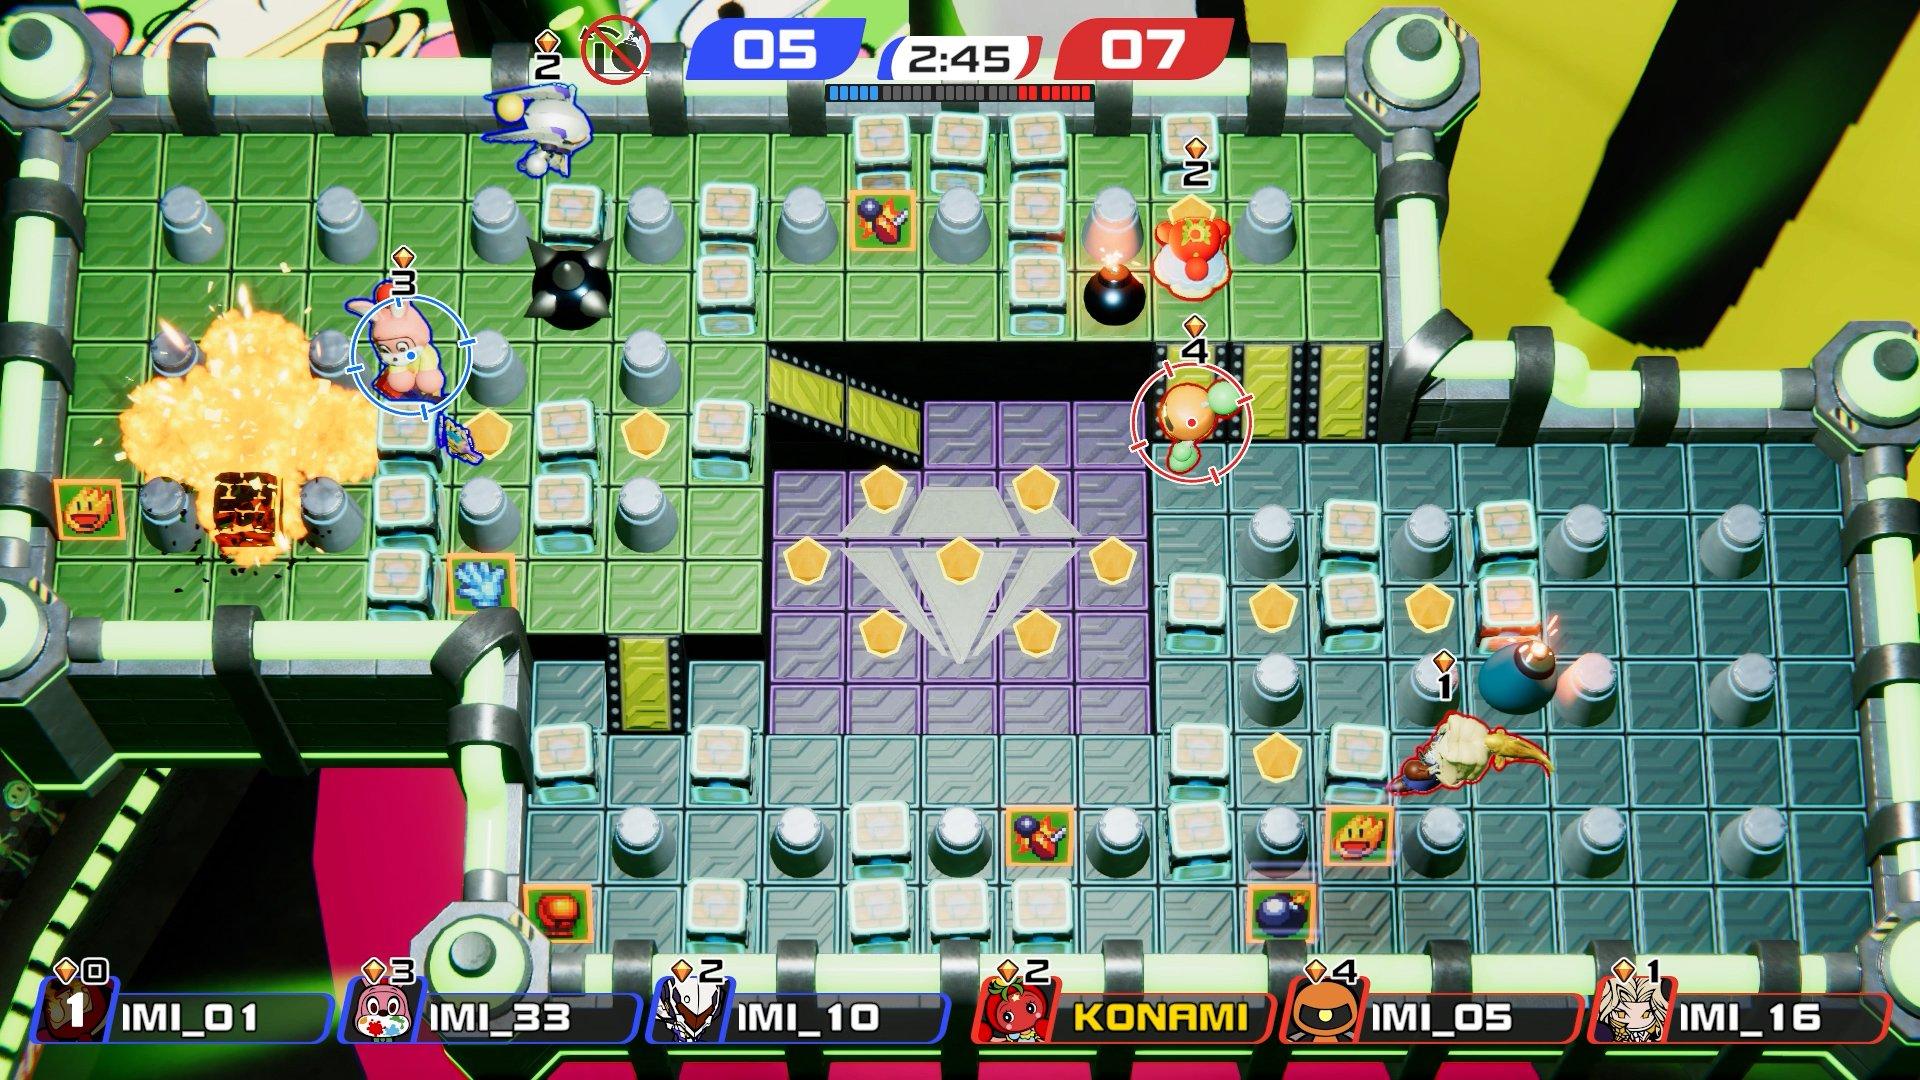 PlayStation 5] Super Bomberman R 2 Review